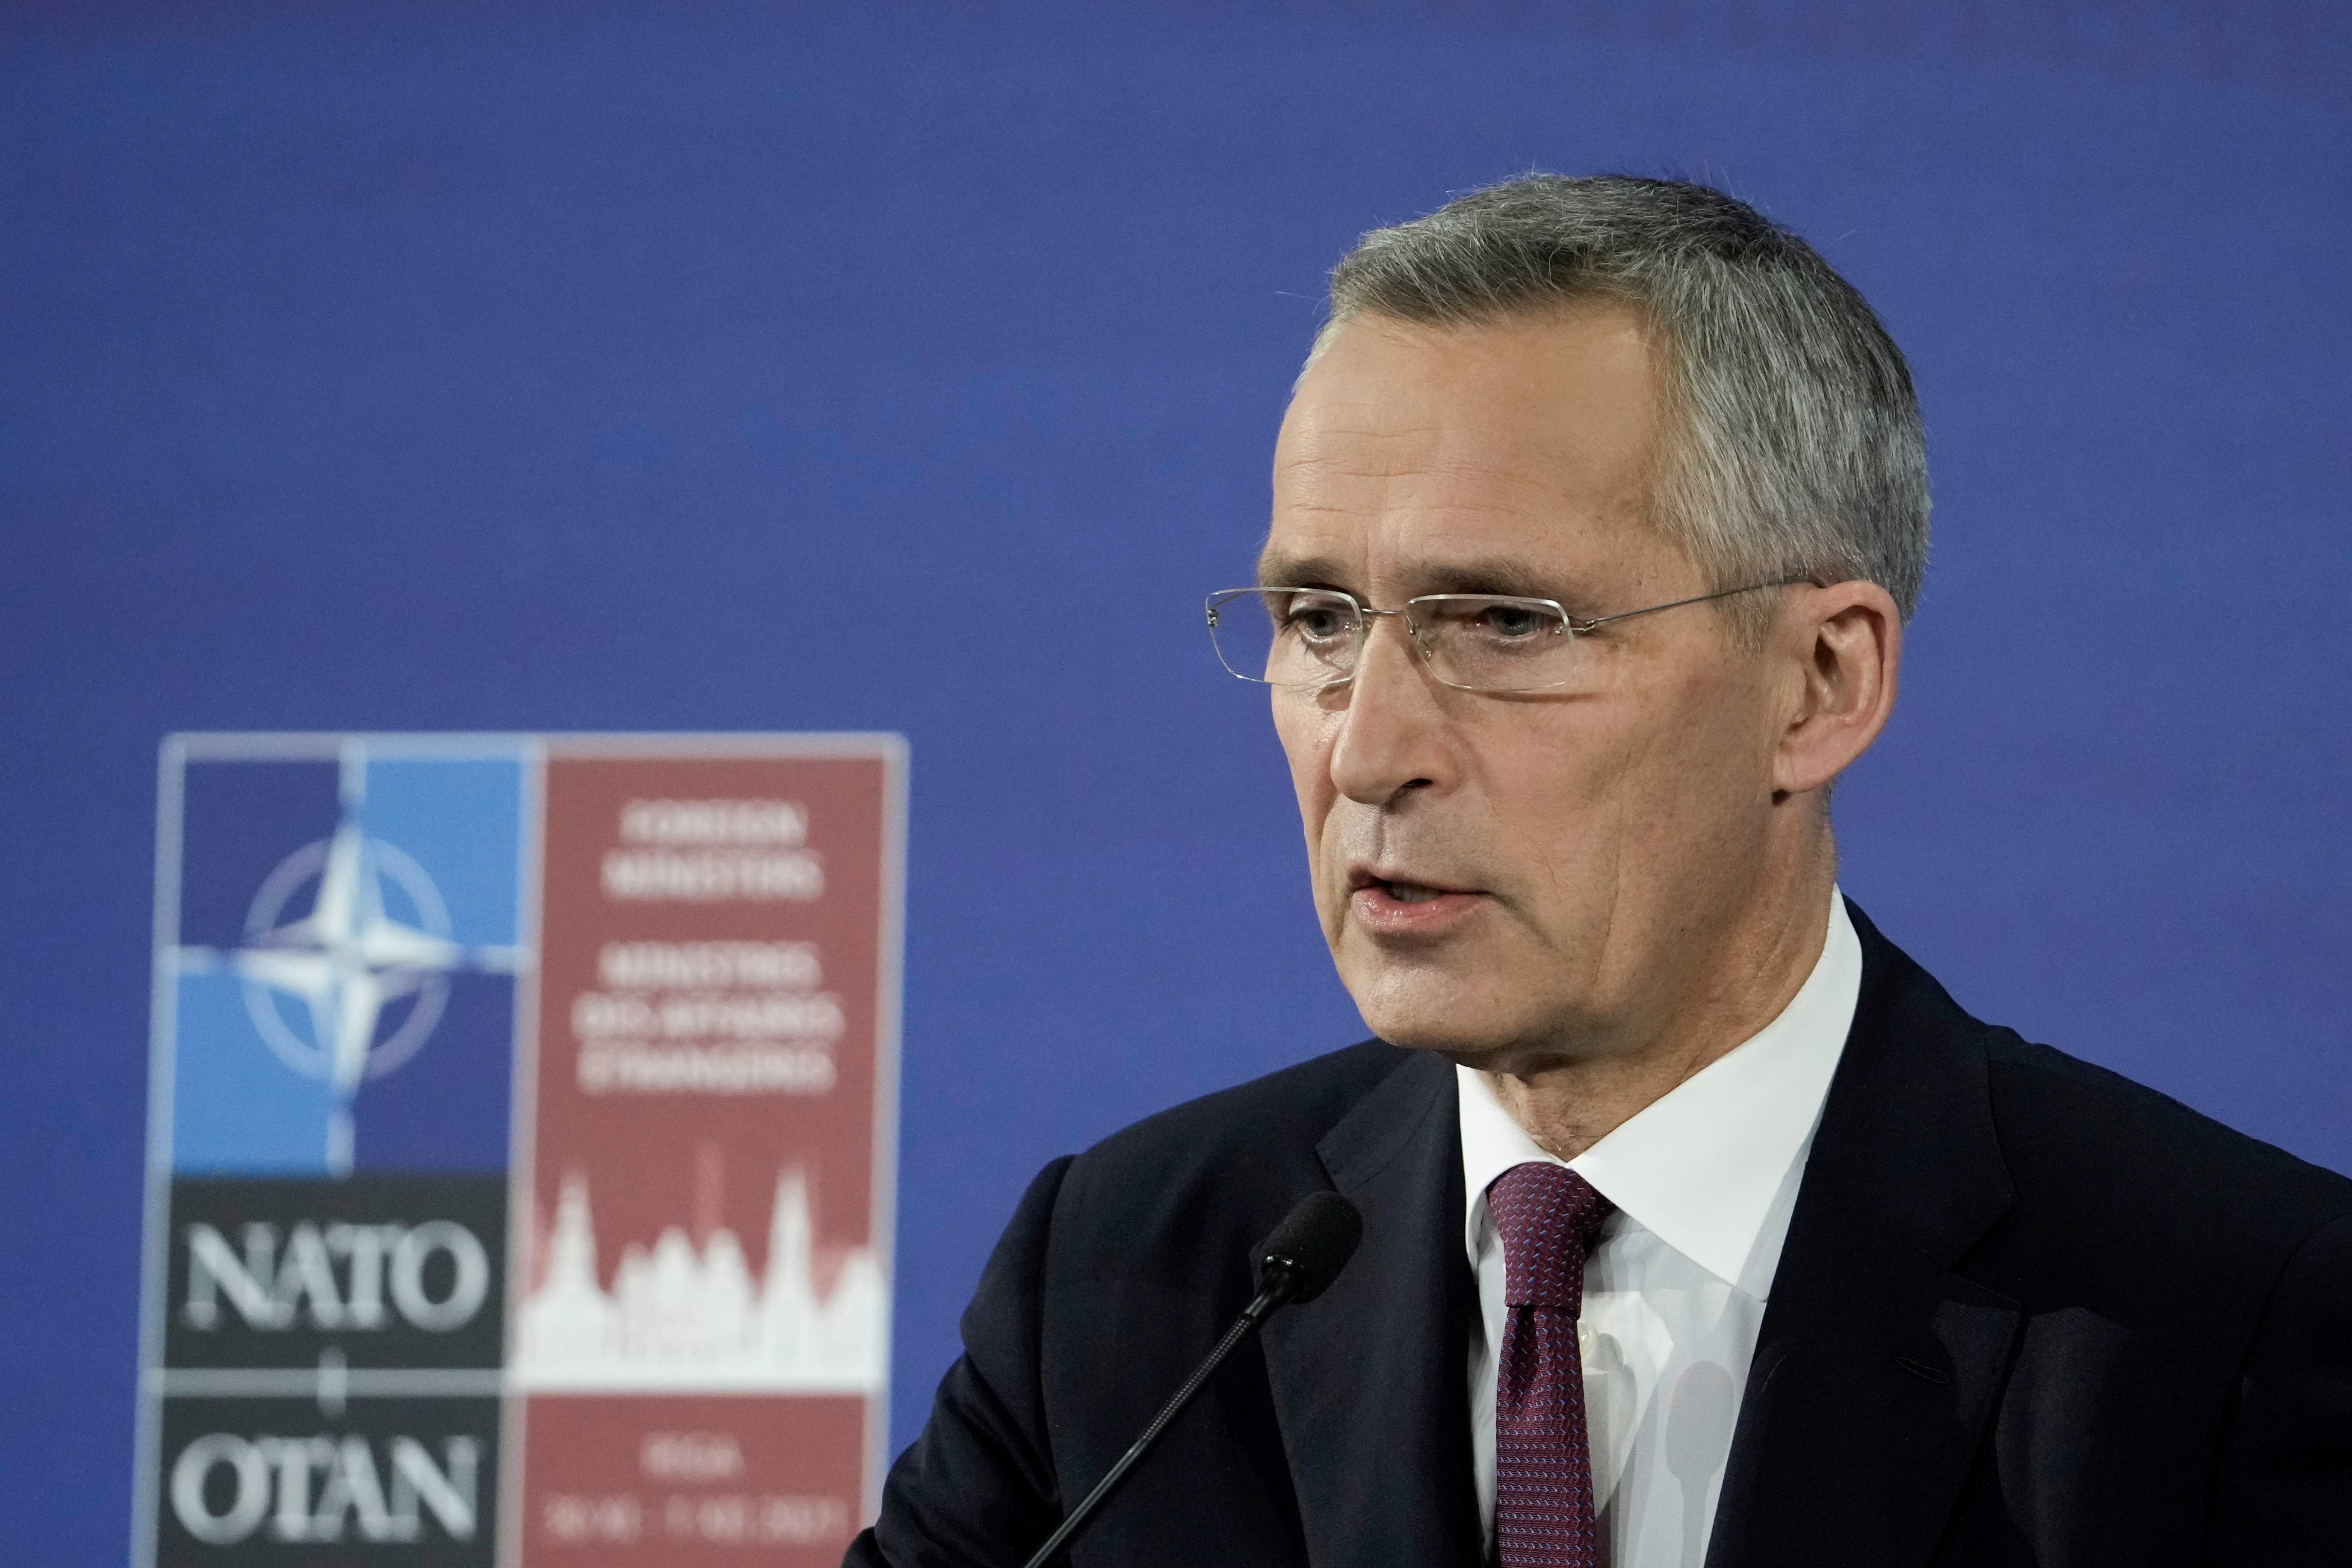 NATO Secretary General Jens Stoltenberg speaks at the NATO Foreign Ministers' Summit in Riga, Latvia on 1 December 2021. REUTERS / Ints Kalnins